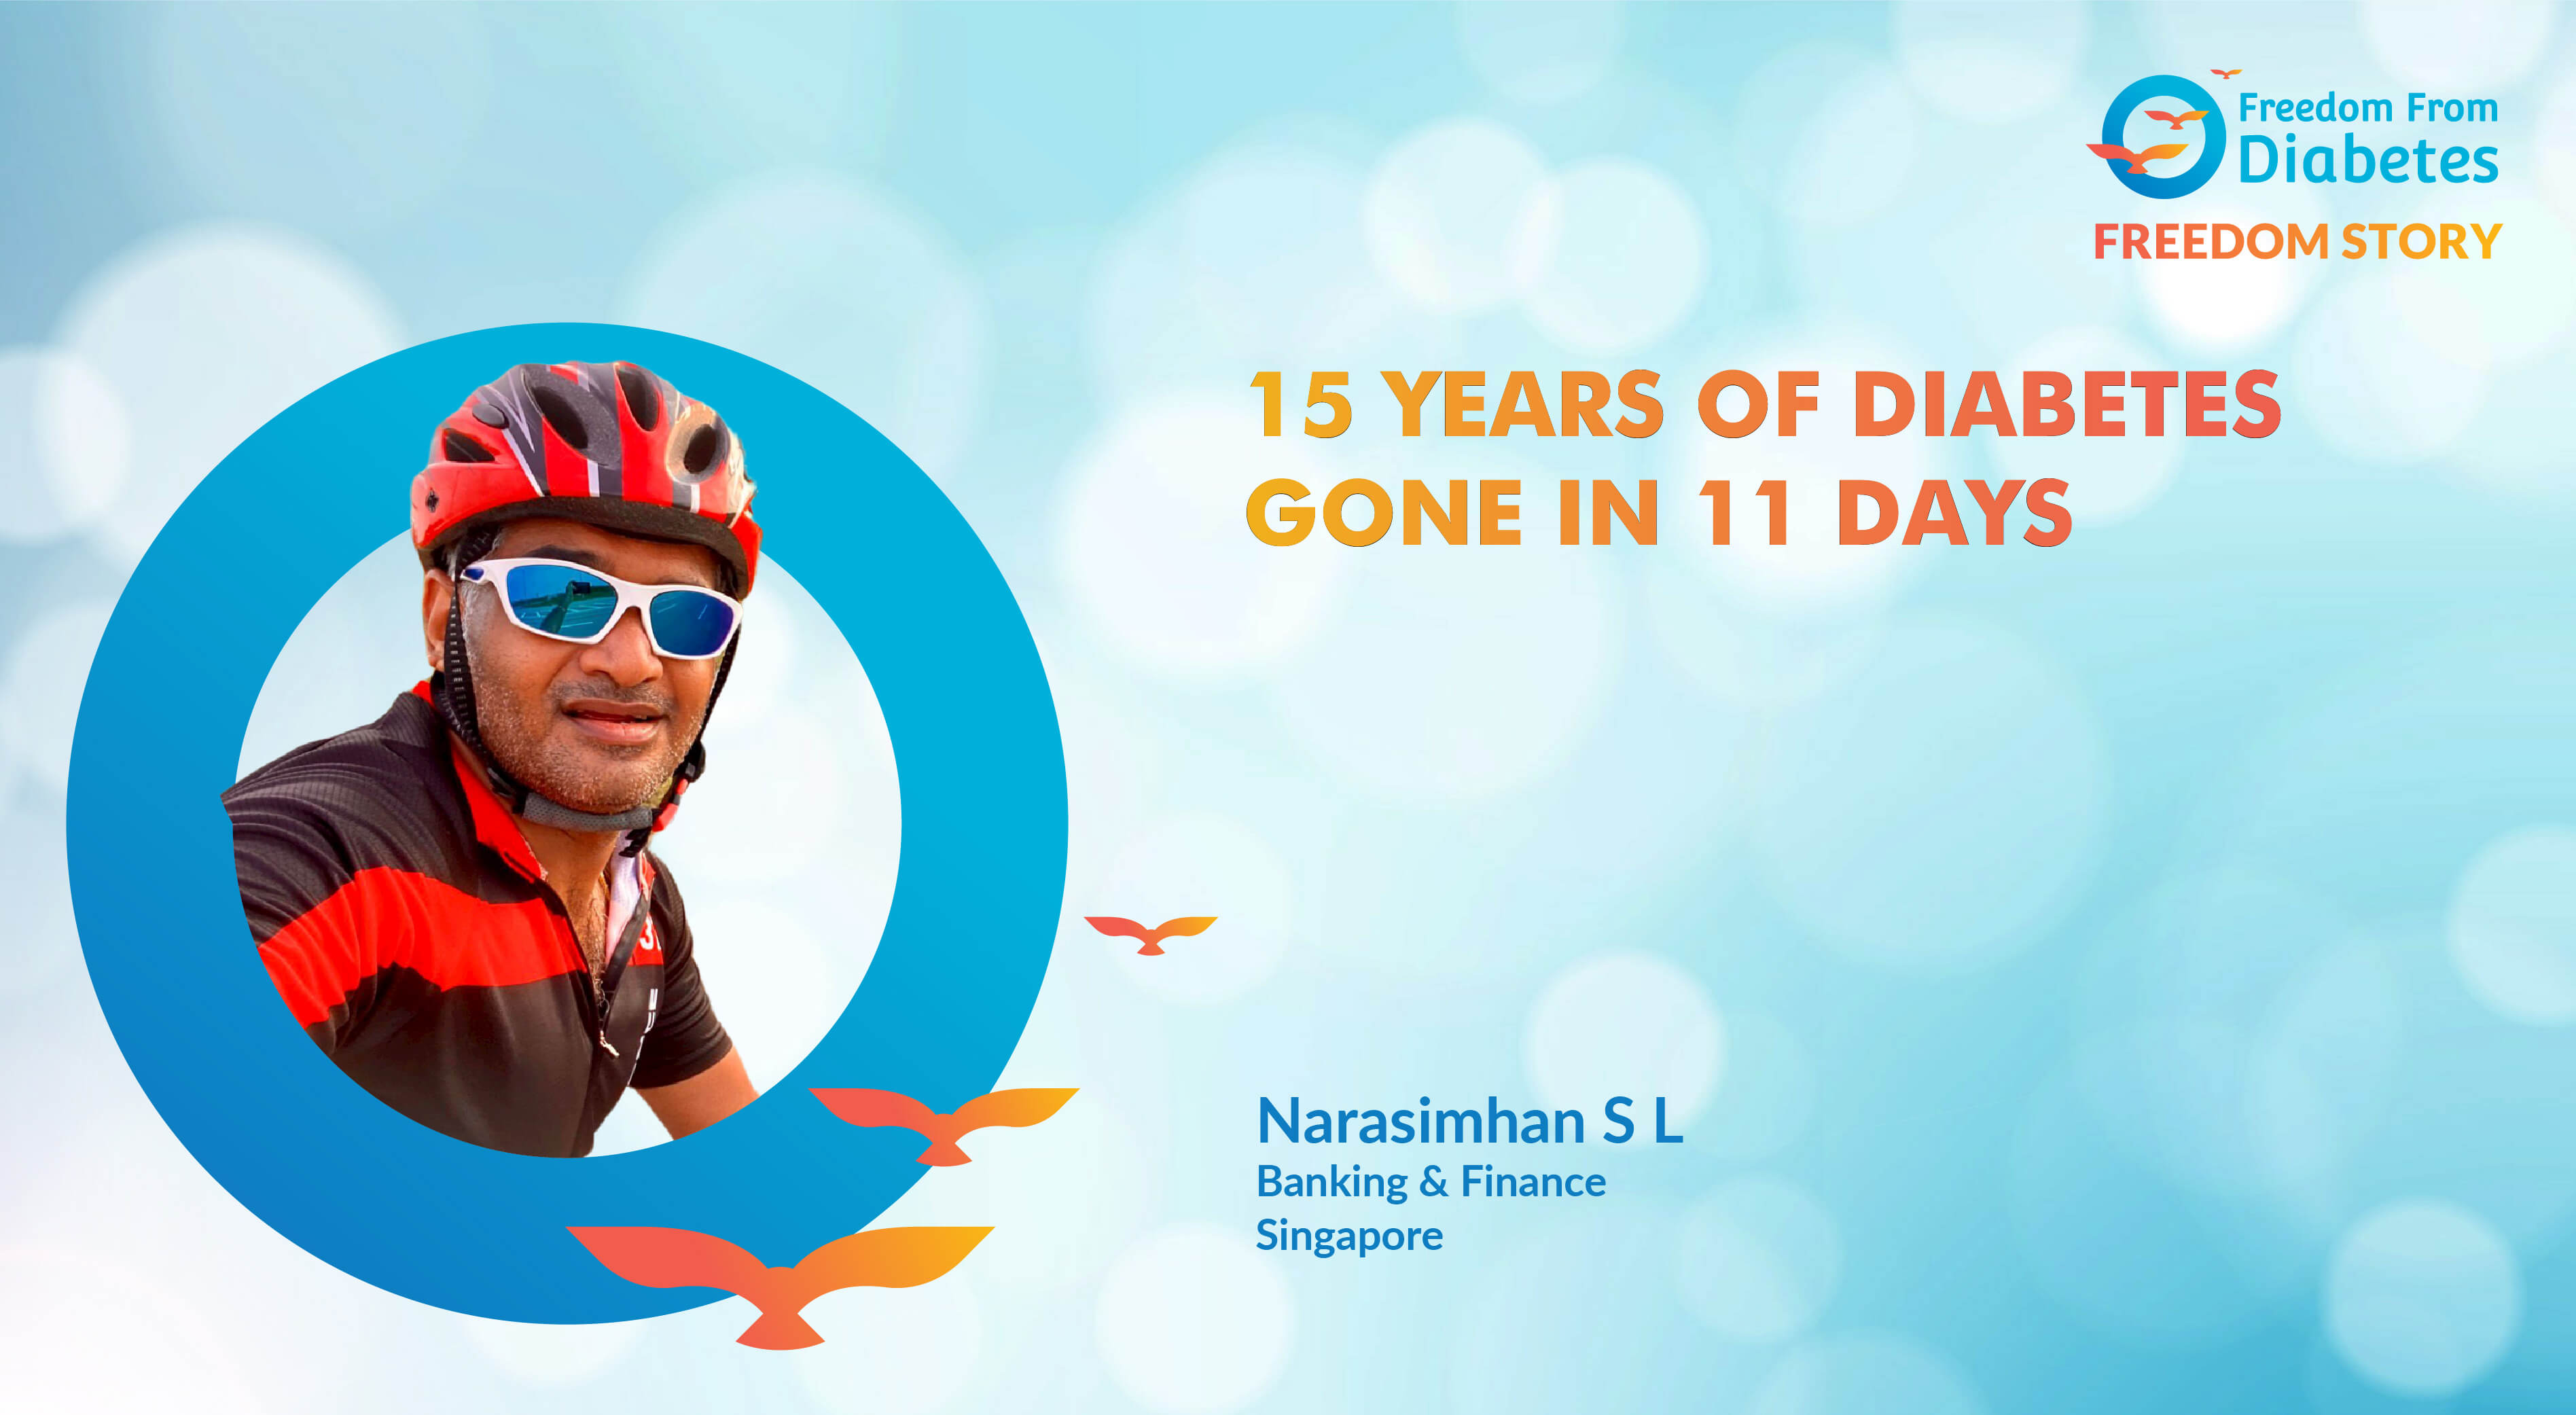 Narasimhan S L: How I achieved freedom in 11 days